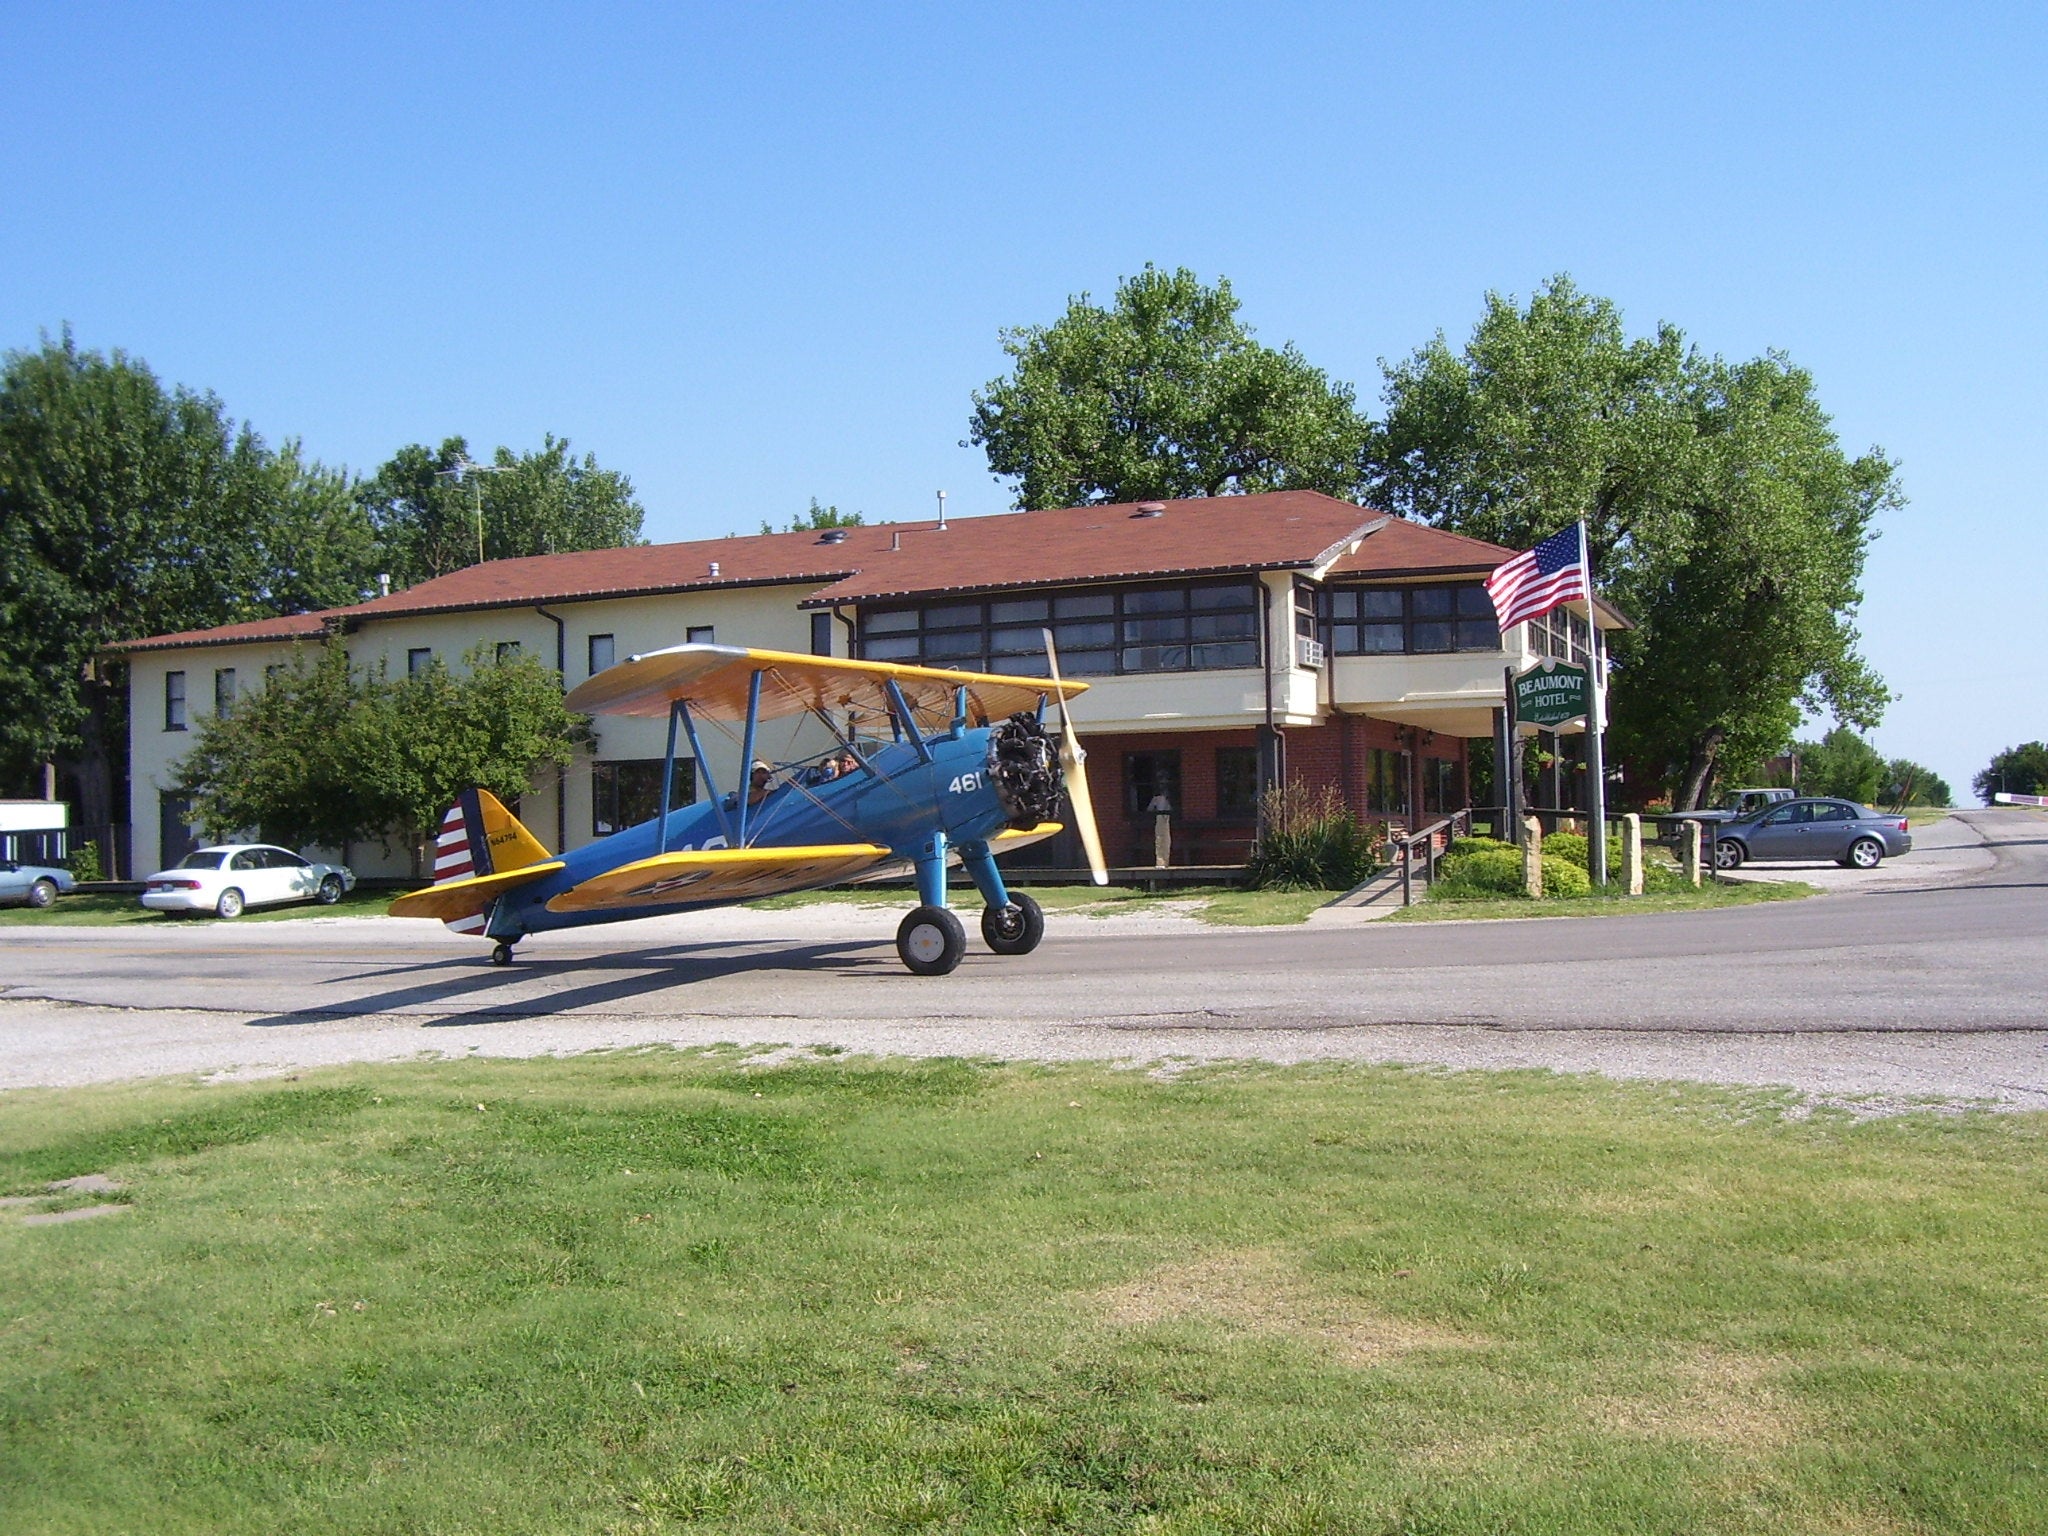 Historic Kansas Aviation Spot Holds Special Meaning for its Owner